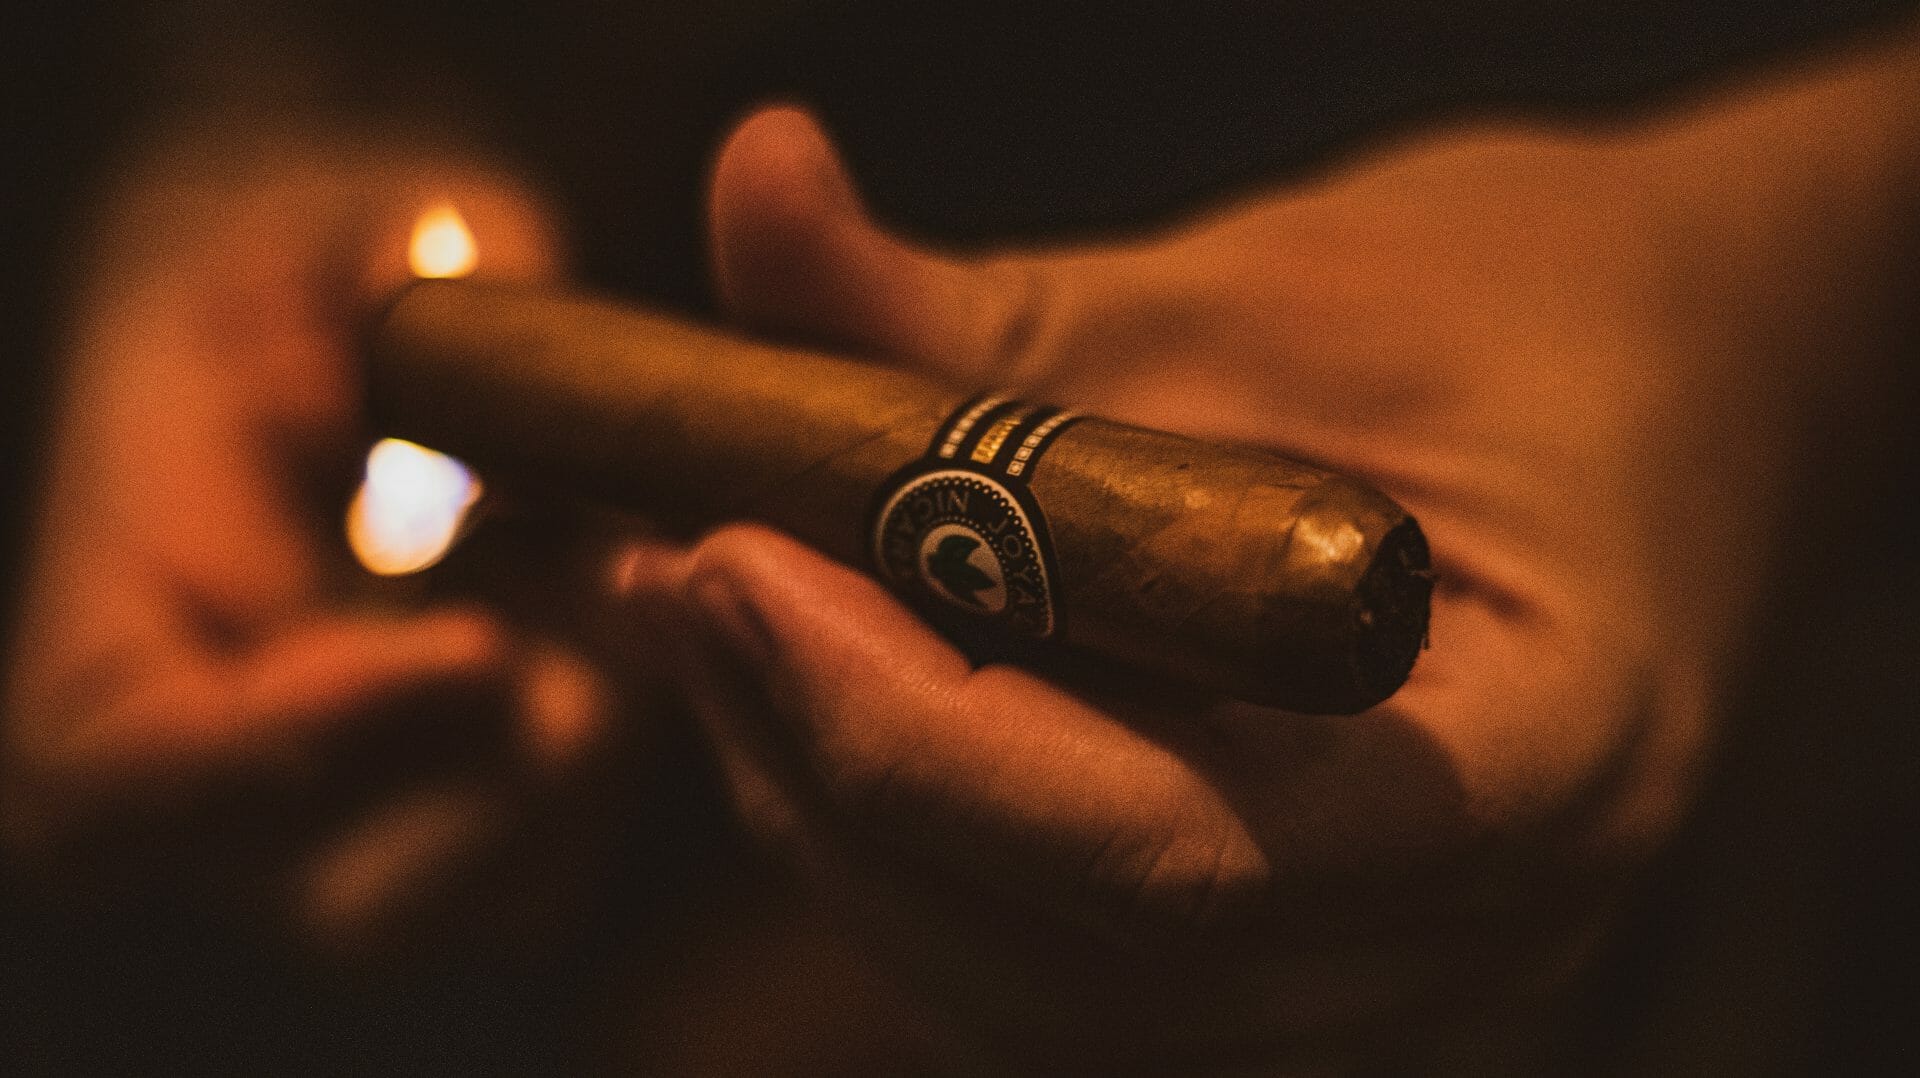 The Beginner’s Guide to Cigars: A Subtle Long Honored Tradition